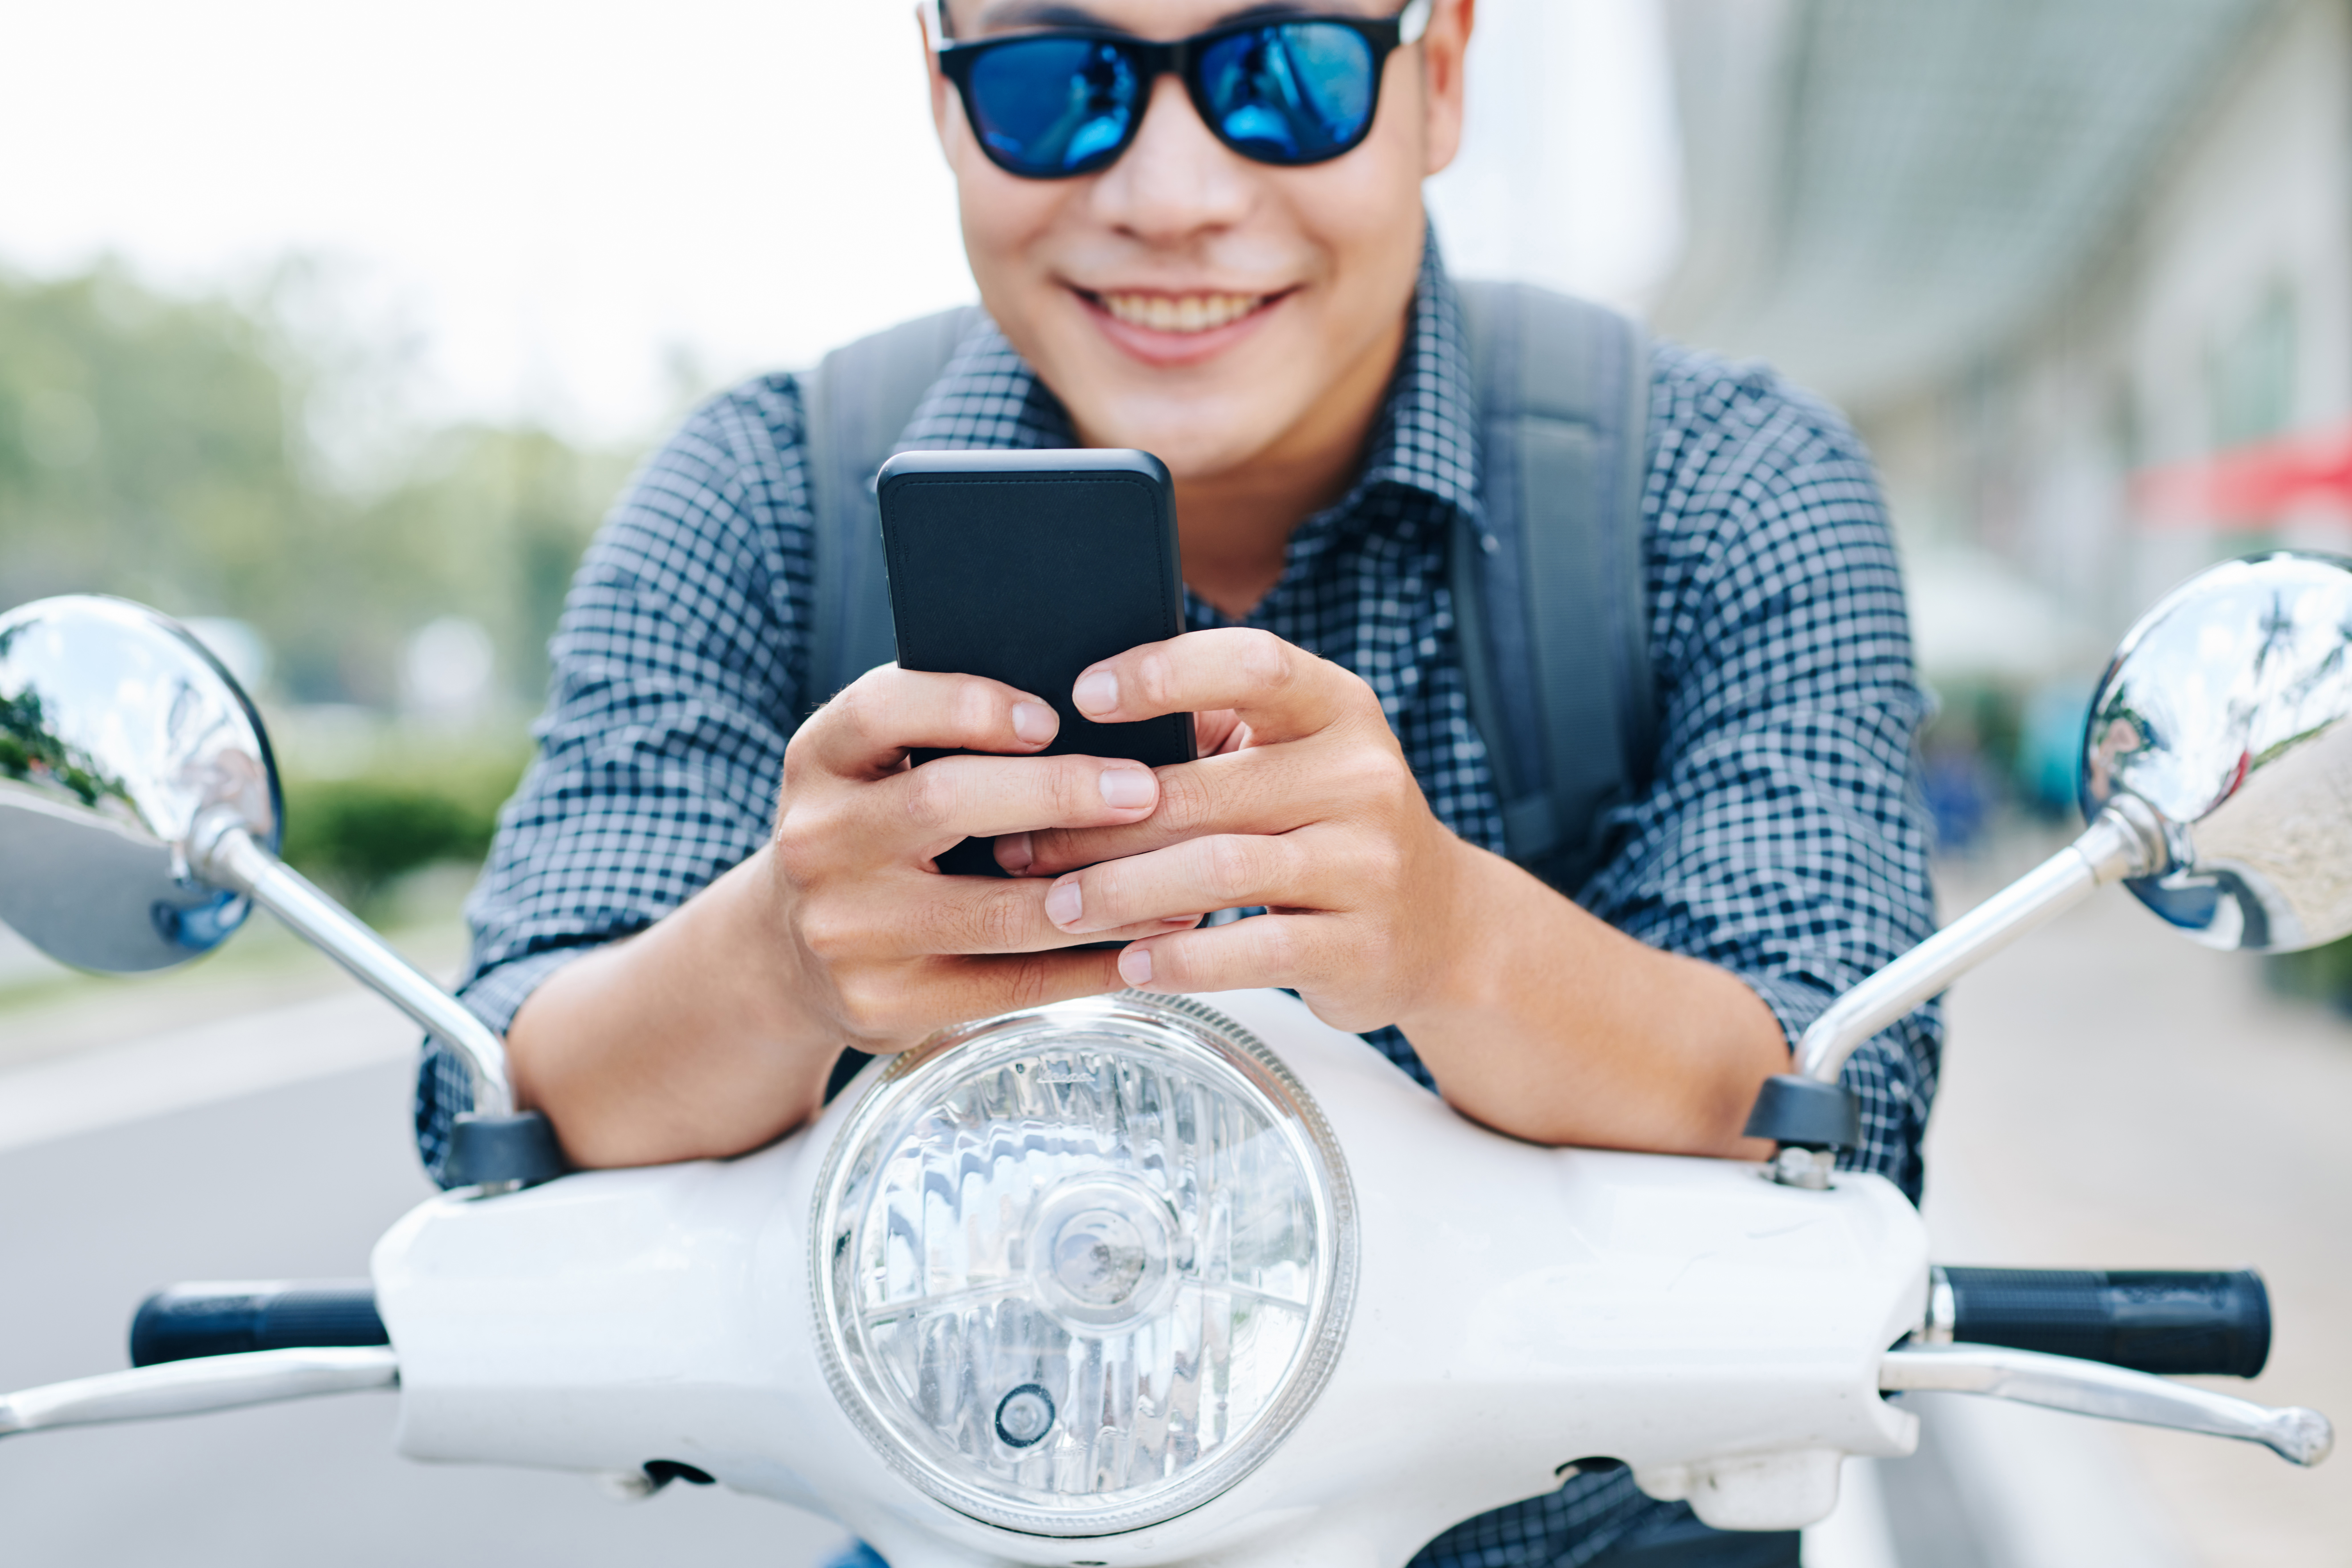 Man sitting on an e-scooter with a smartphone in his hands